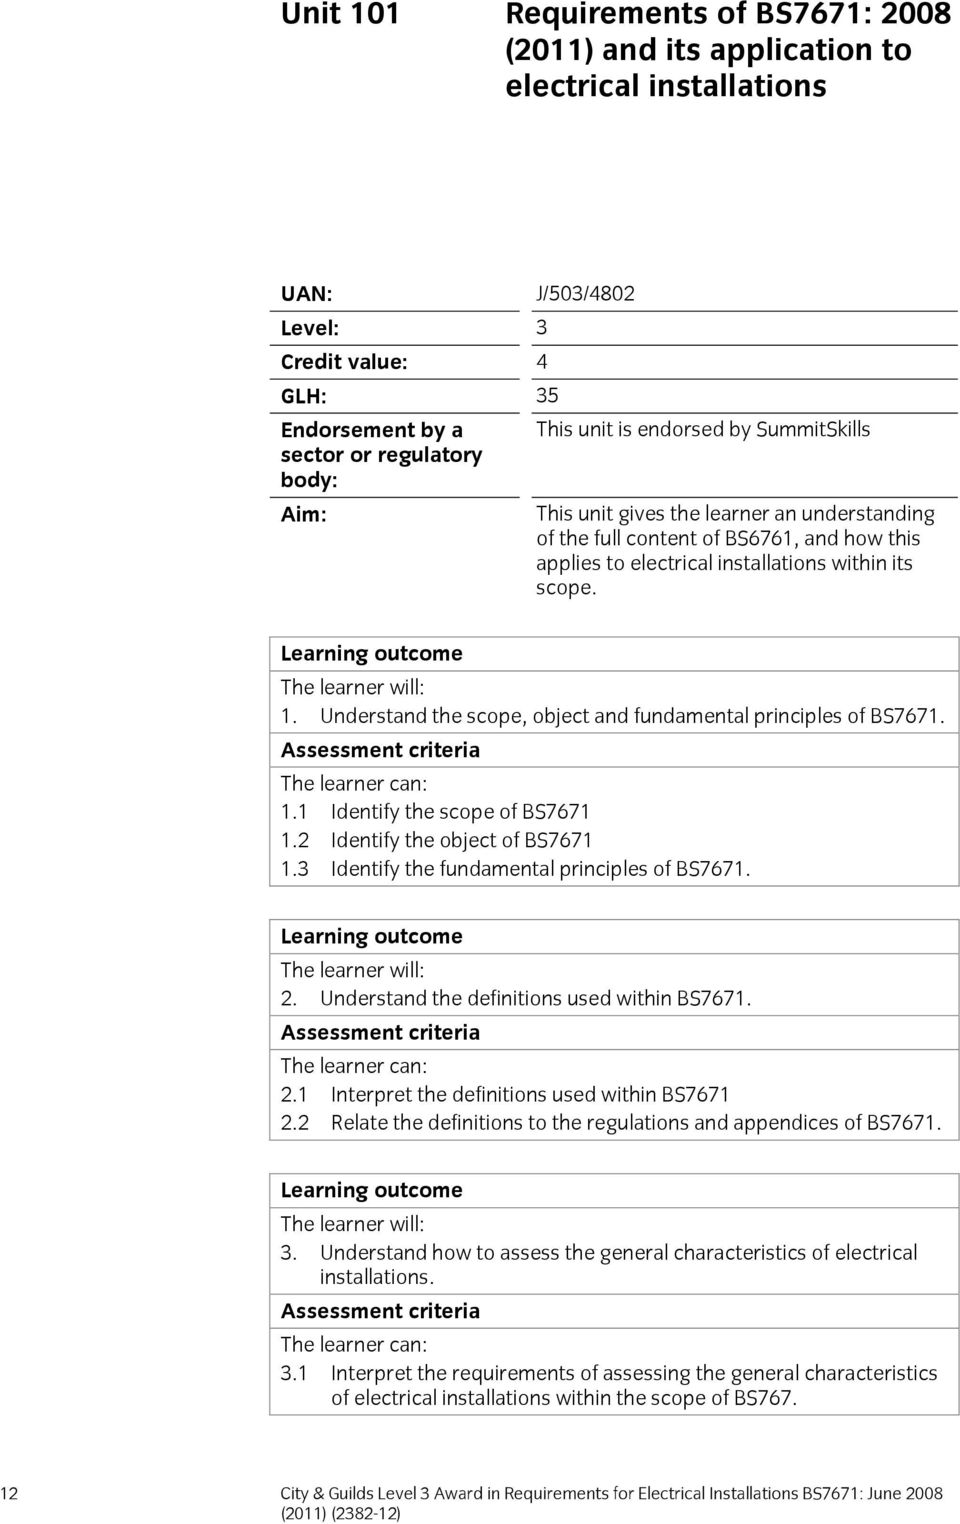 Learning outcome The learner will: 1. Understand the scope, object and fundamental principles of BS7671. Assessment criteria The learner can: 1.1 Identify the scope of BS7671 1.